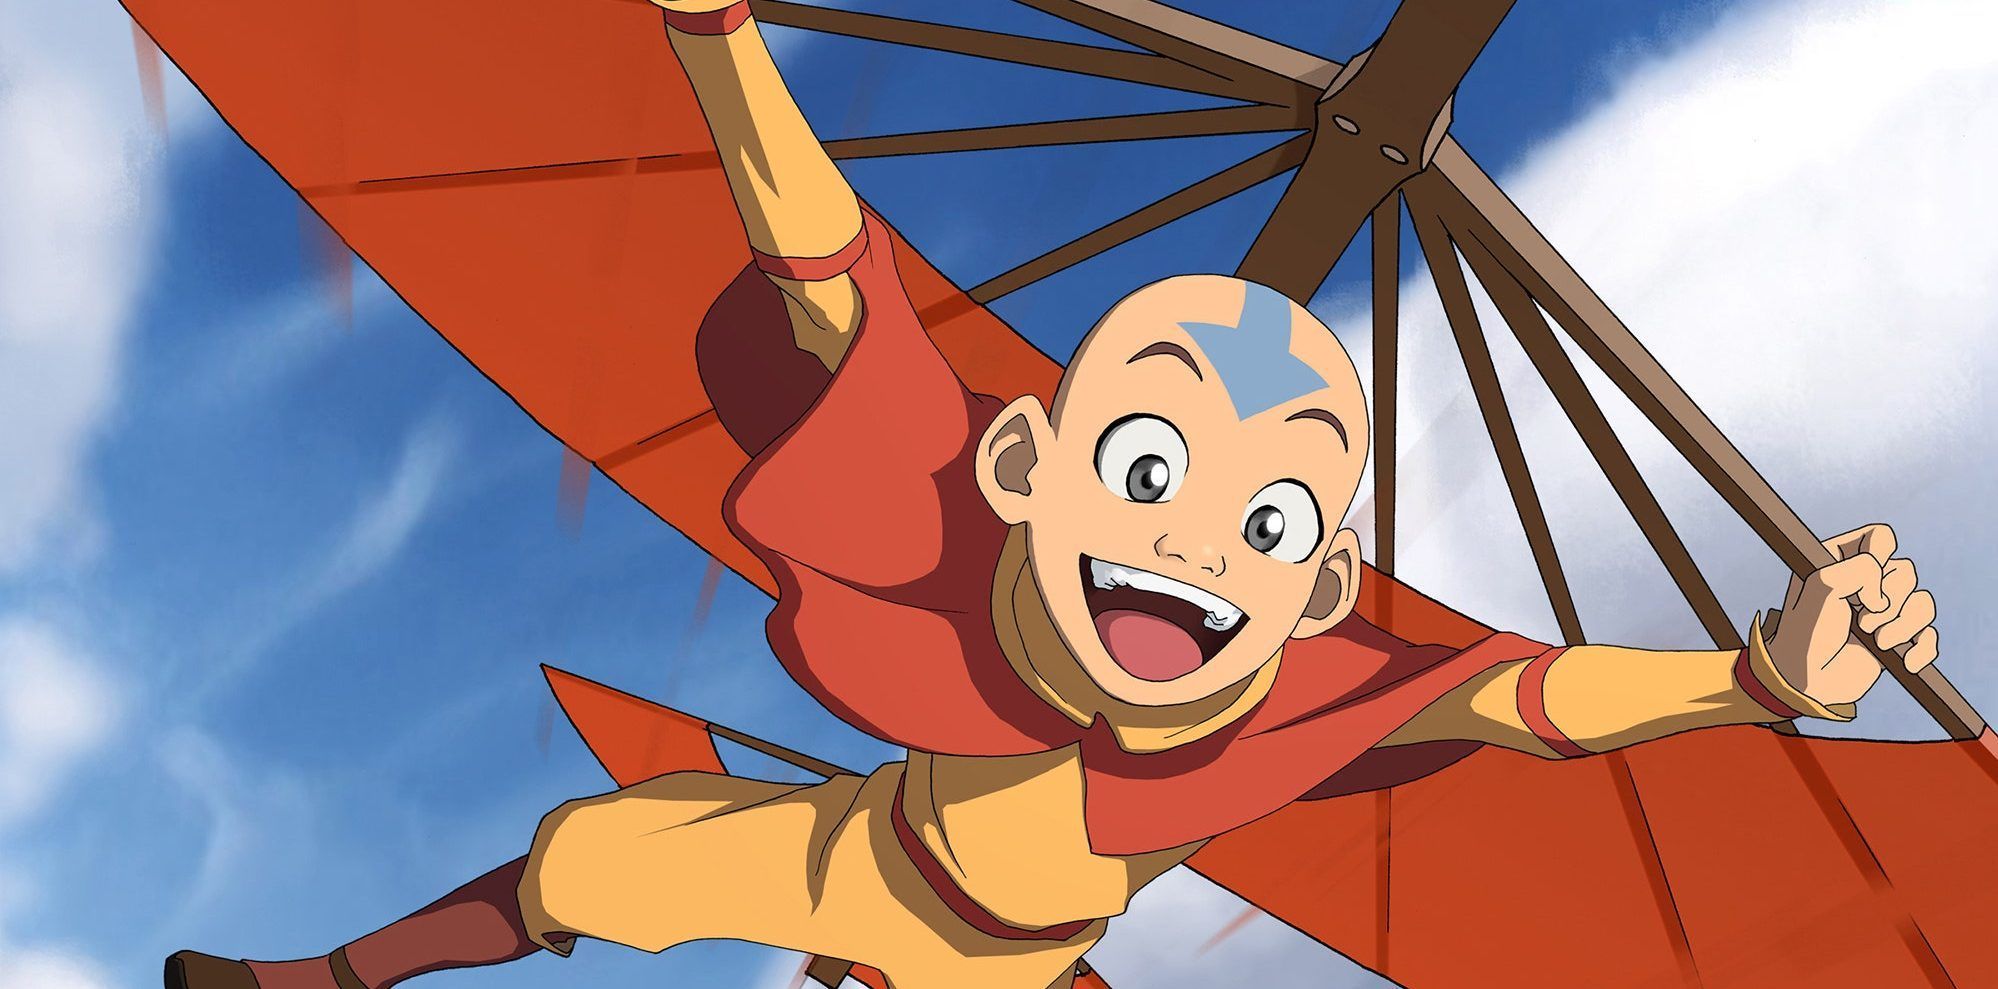 Avatar The Last Airbender fans unhappy with creators leaving Netflix show   CNN